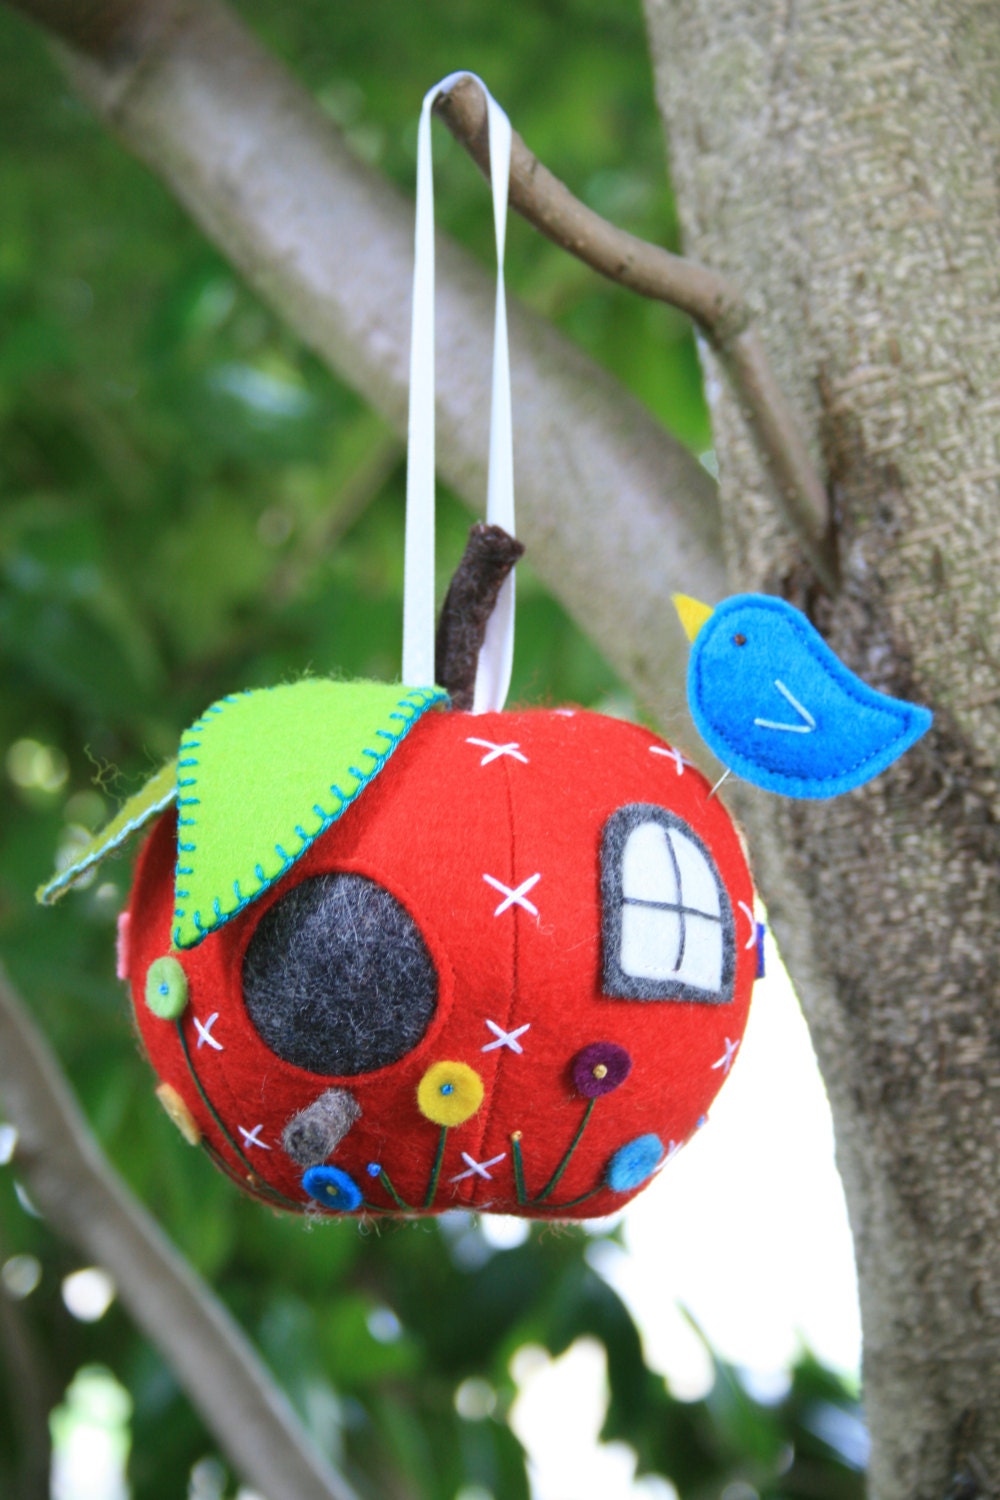 red felt apple pincushion house with blue felt bird and embroidered flowers 